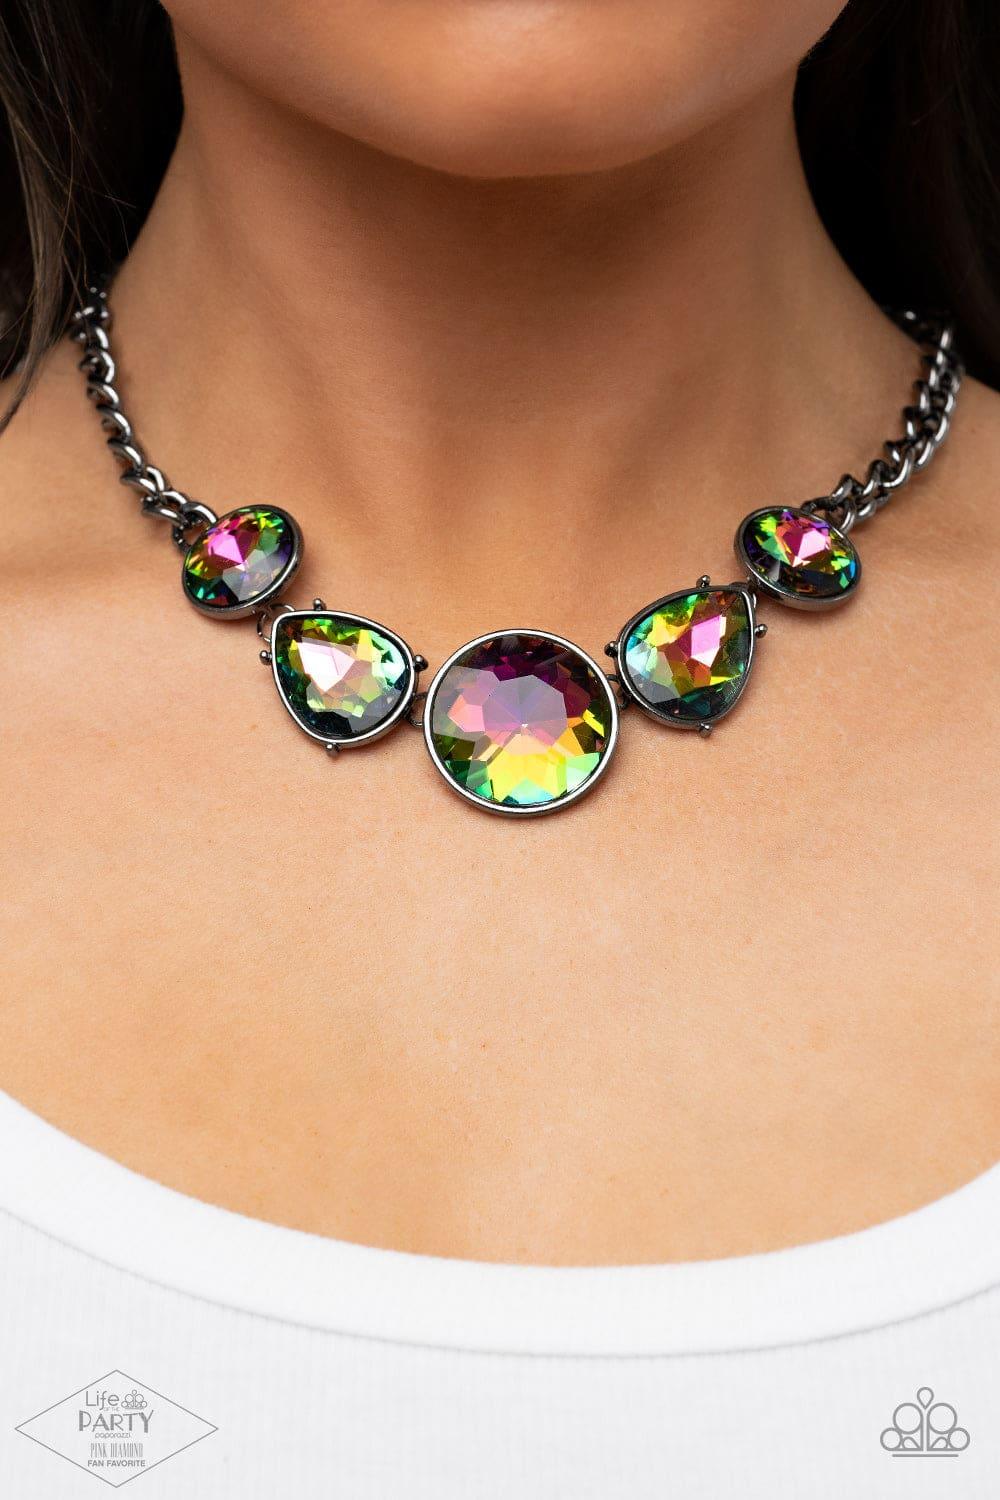 Paparazzi Accessories - All The Worlds My Stage - Multicolor Necklace - Bling by JessieK